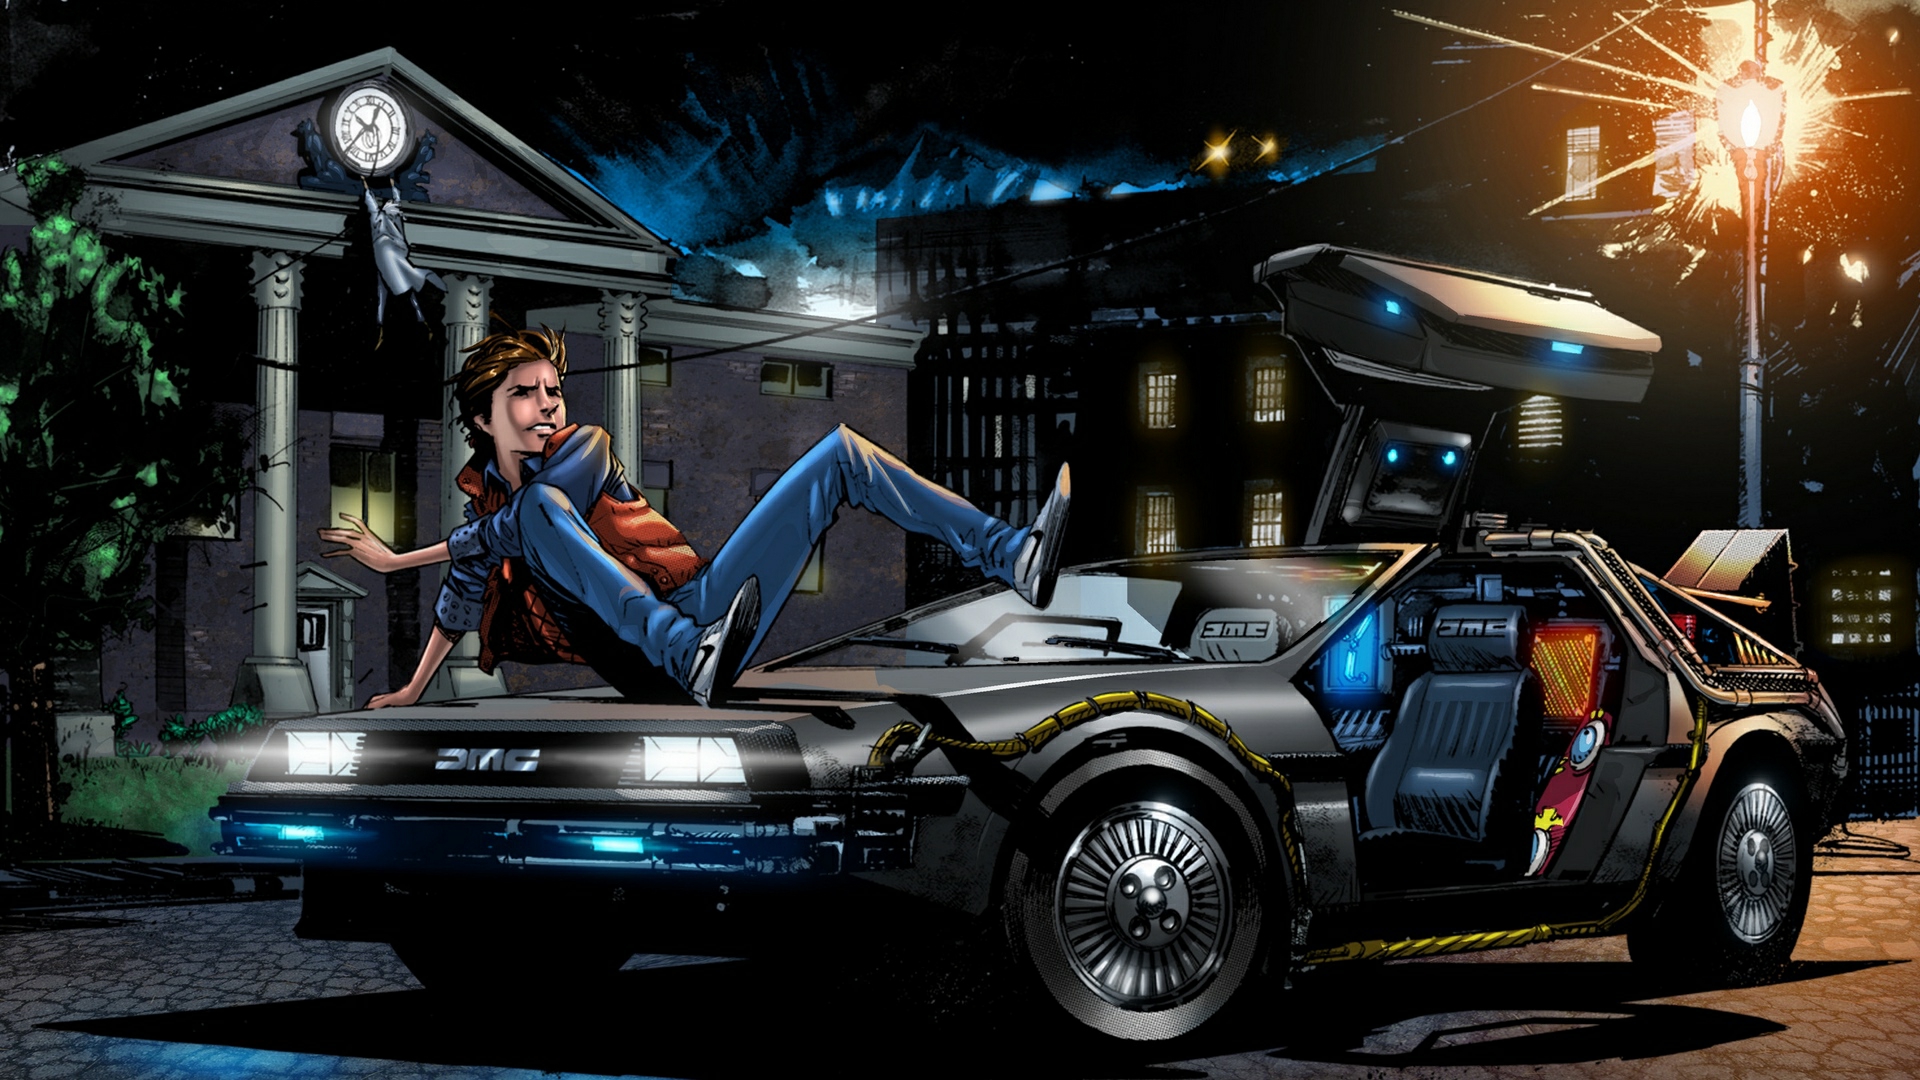 Back To The Future Backgrounds, Pictures, Images